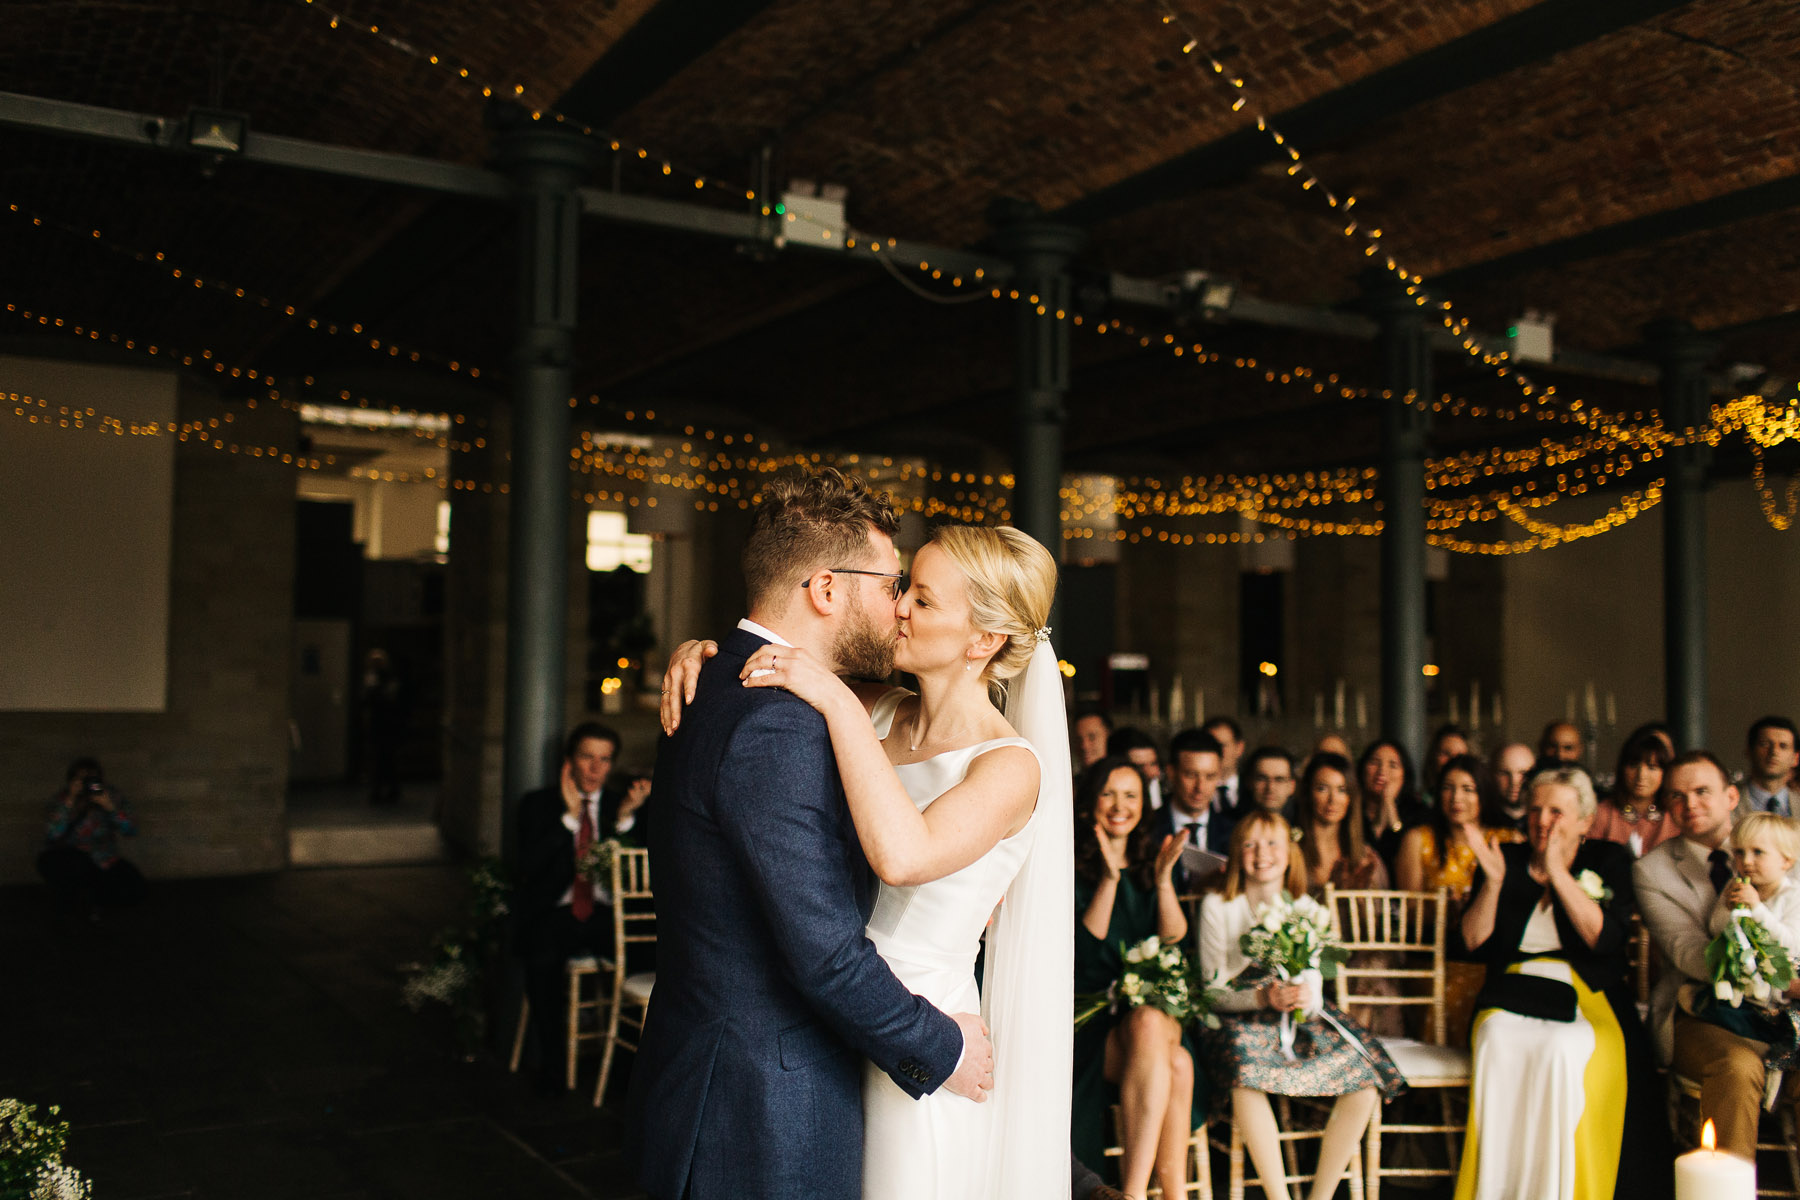 Laura + Dave's Industrial Wedding at The Arches in Dean Clough Mills in Halifax www.pauljosephphotography.co.uk 